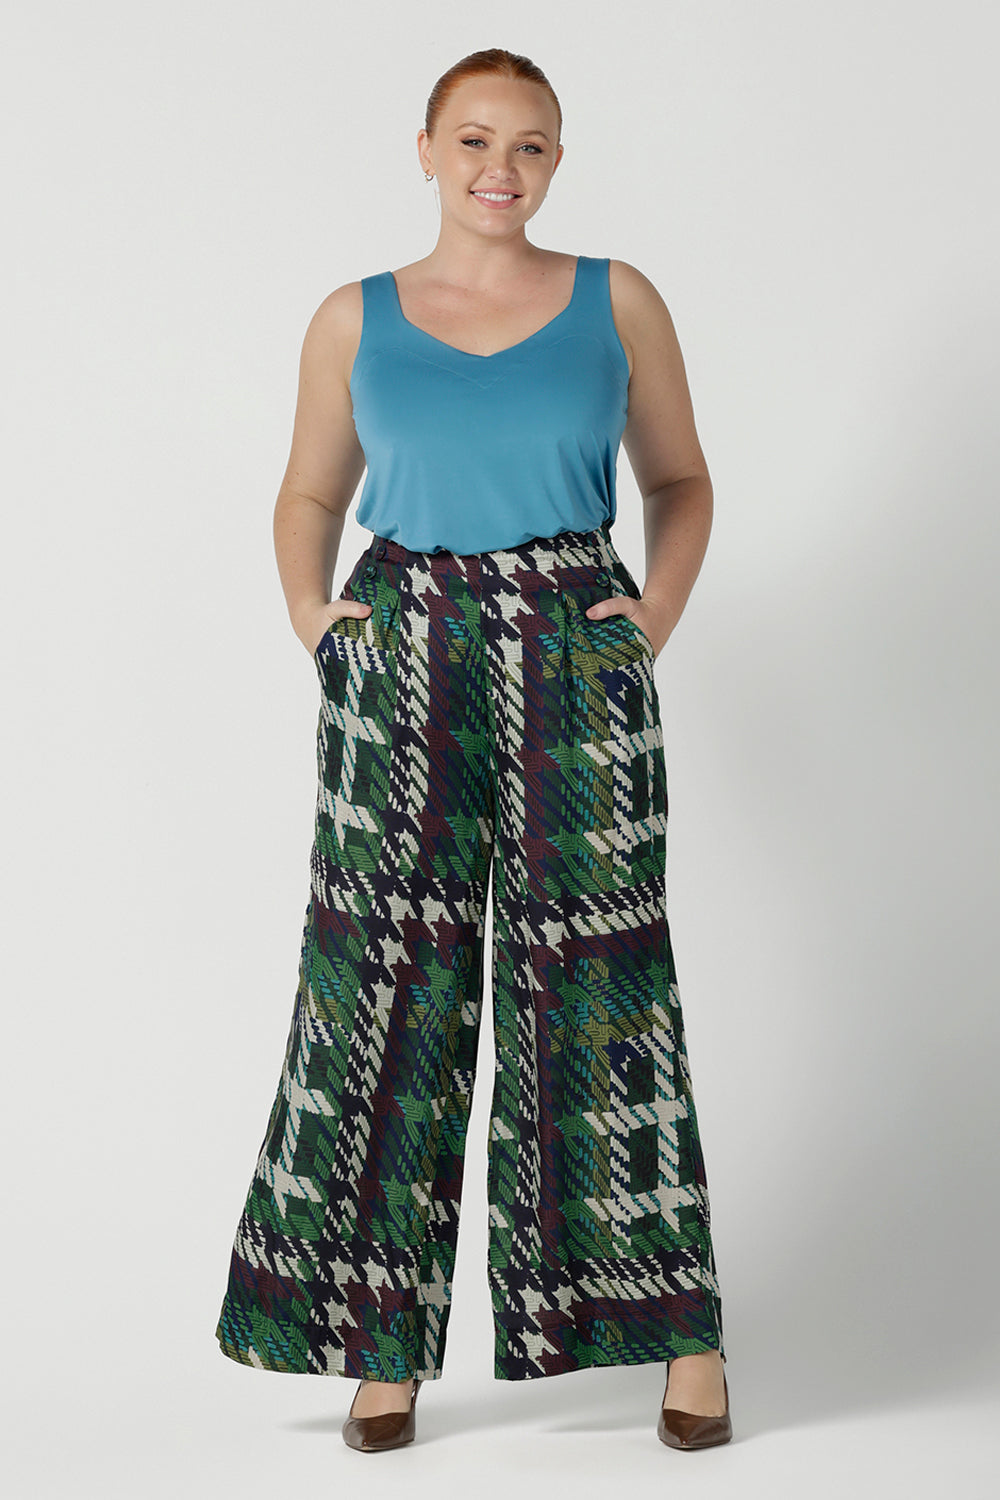 Size 12 Woman wears the Ellery Pant in Houndstooth.  A high waist pant with soft tailoring details. Wide straight leg with silky luxe italian viscose. Made in Australia for women size 8 - 24.